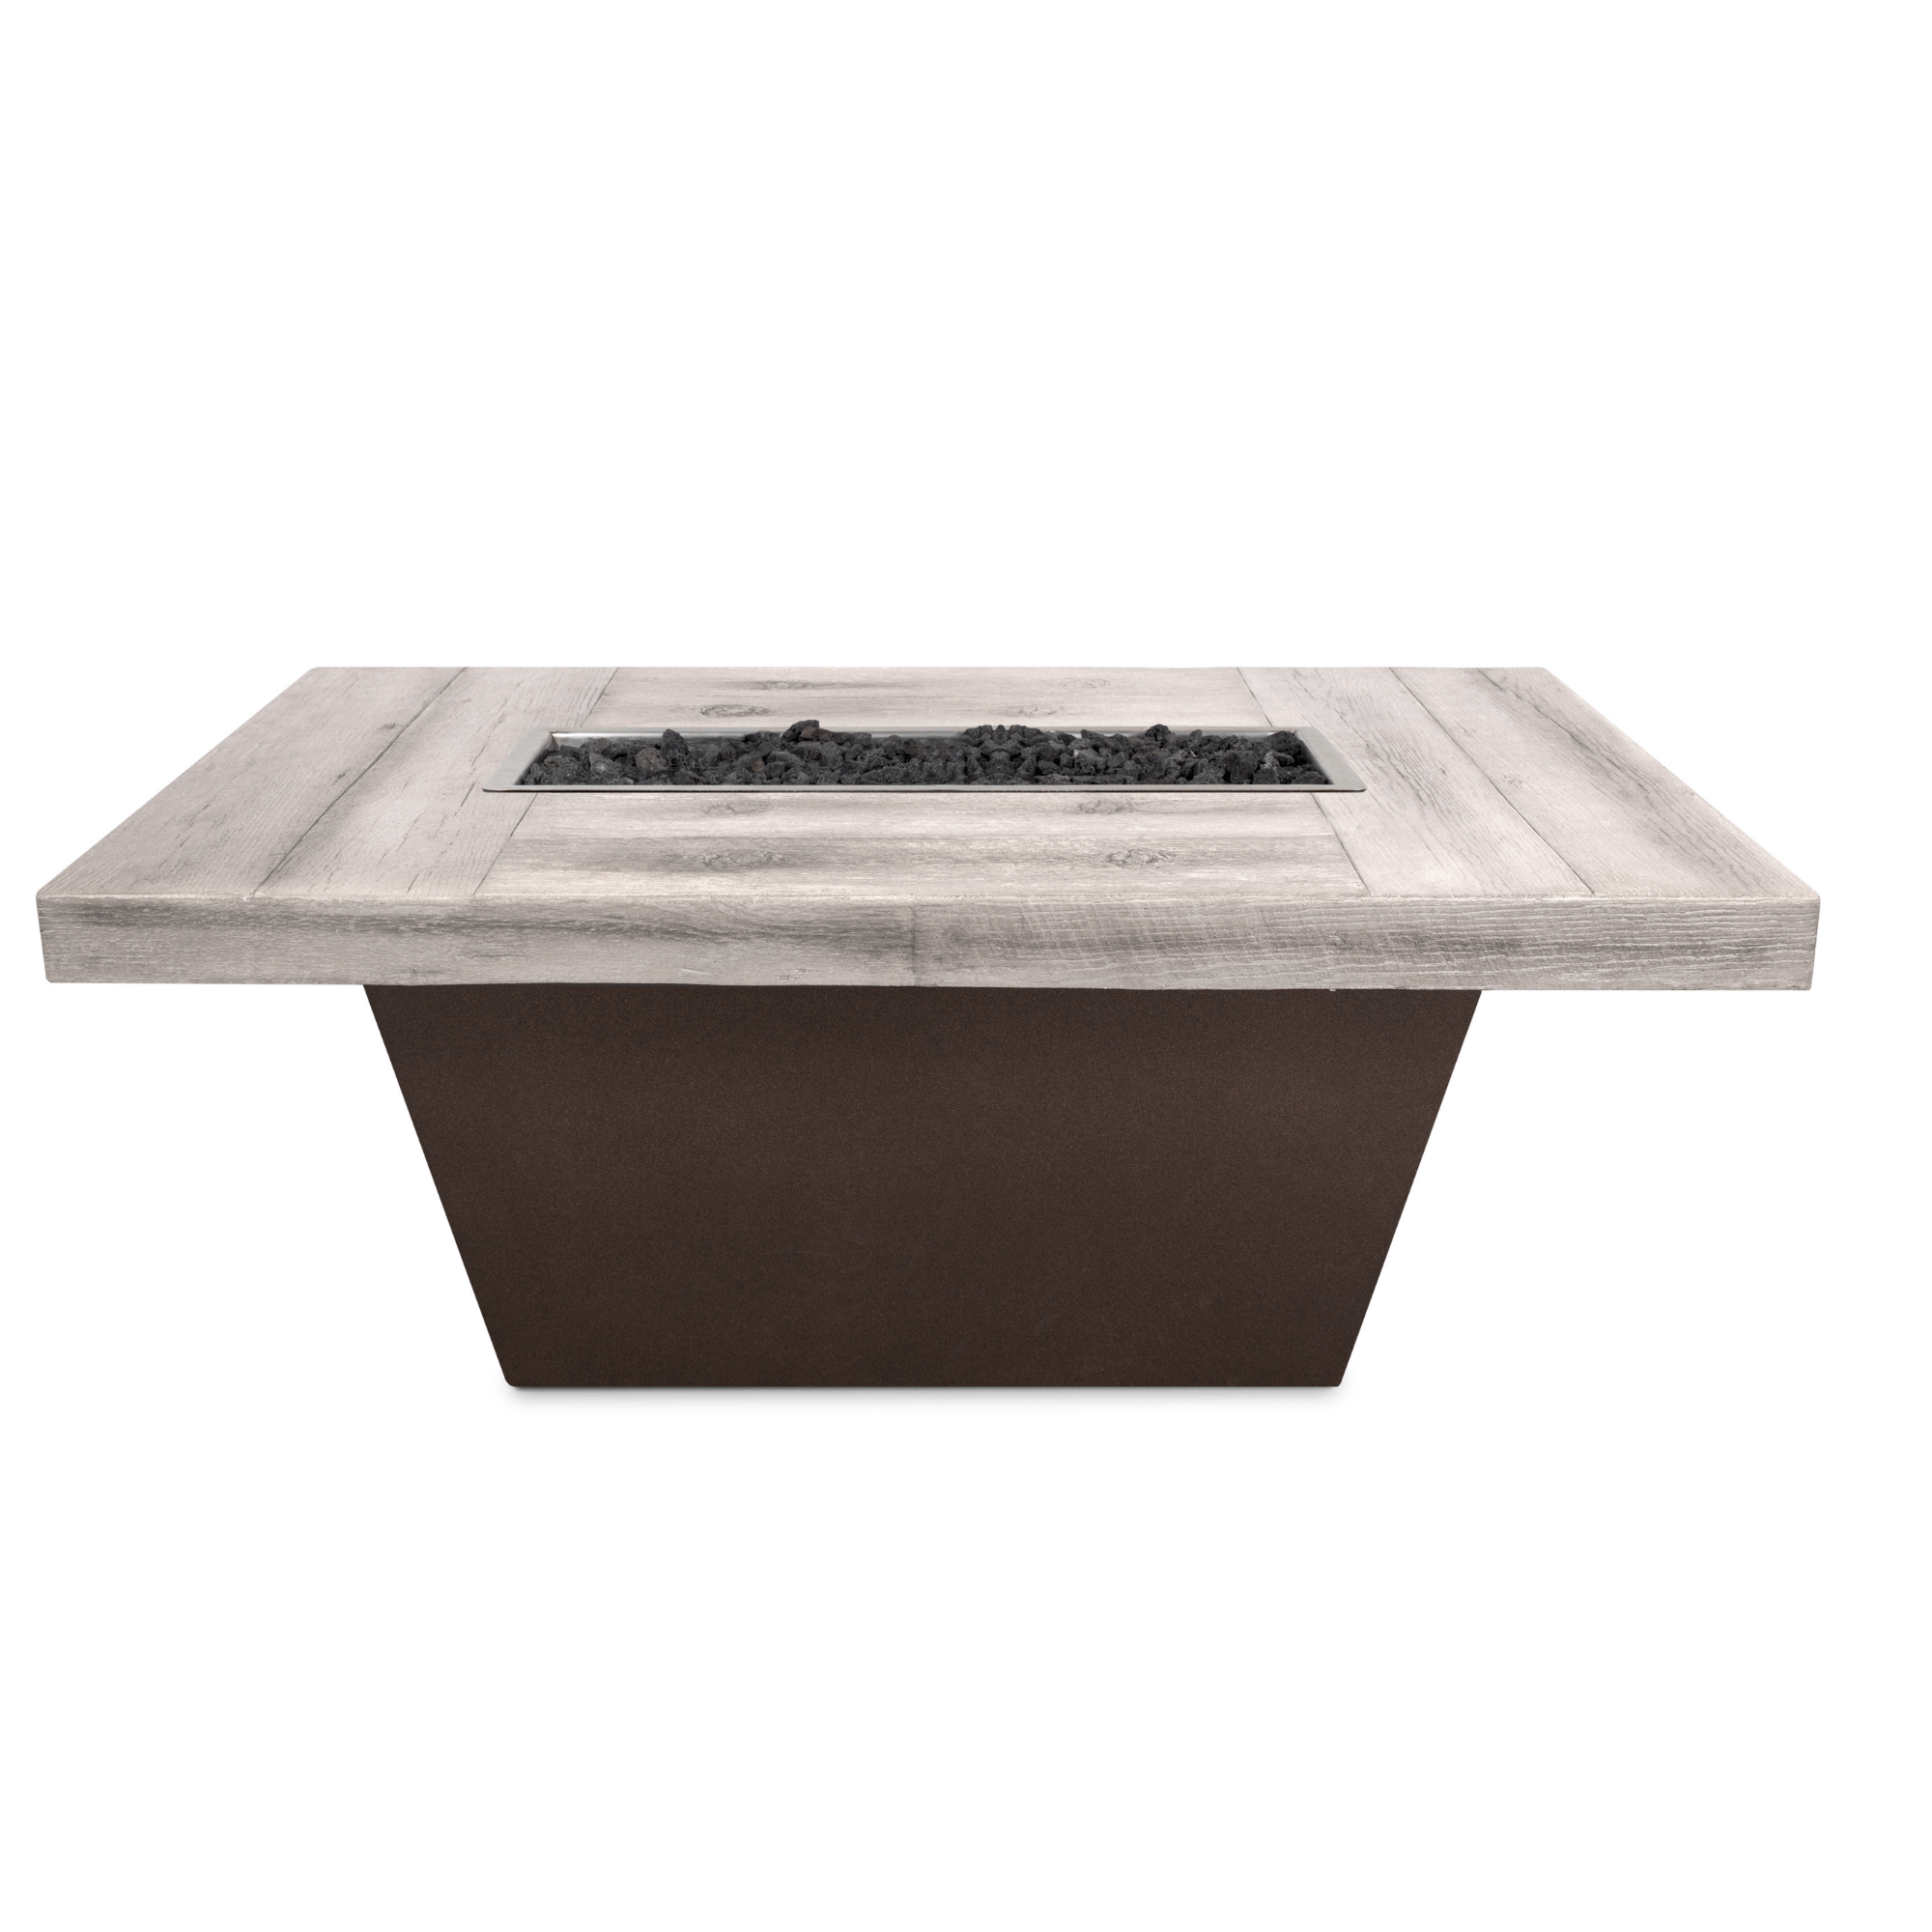 THE OUTDOOR PLUS Tacoma 48" Wood Grain and Steel Fire Pit-Rustic Furniture Marketplace